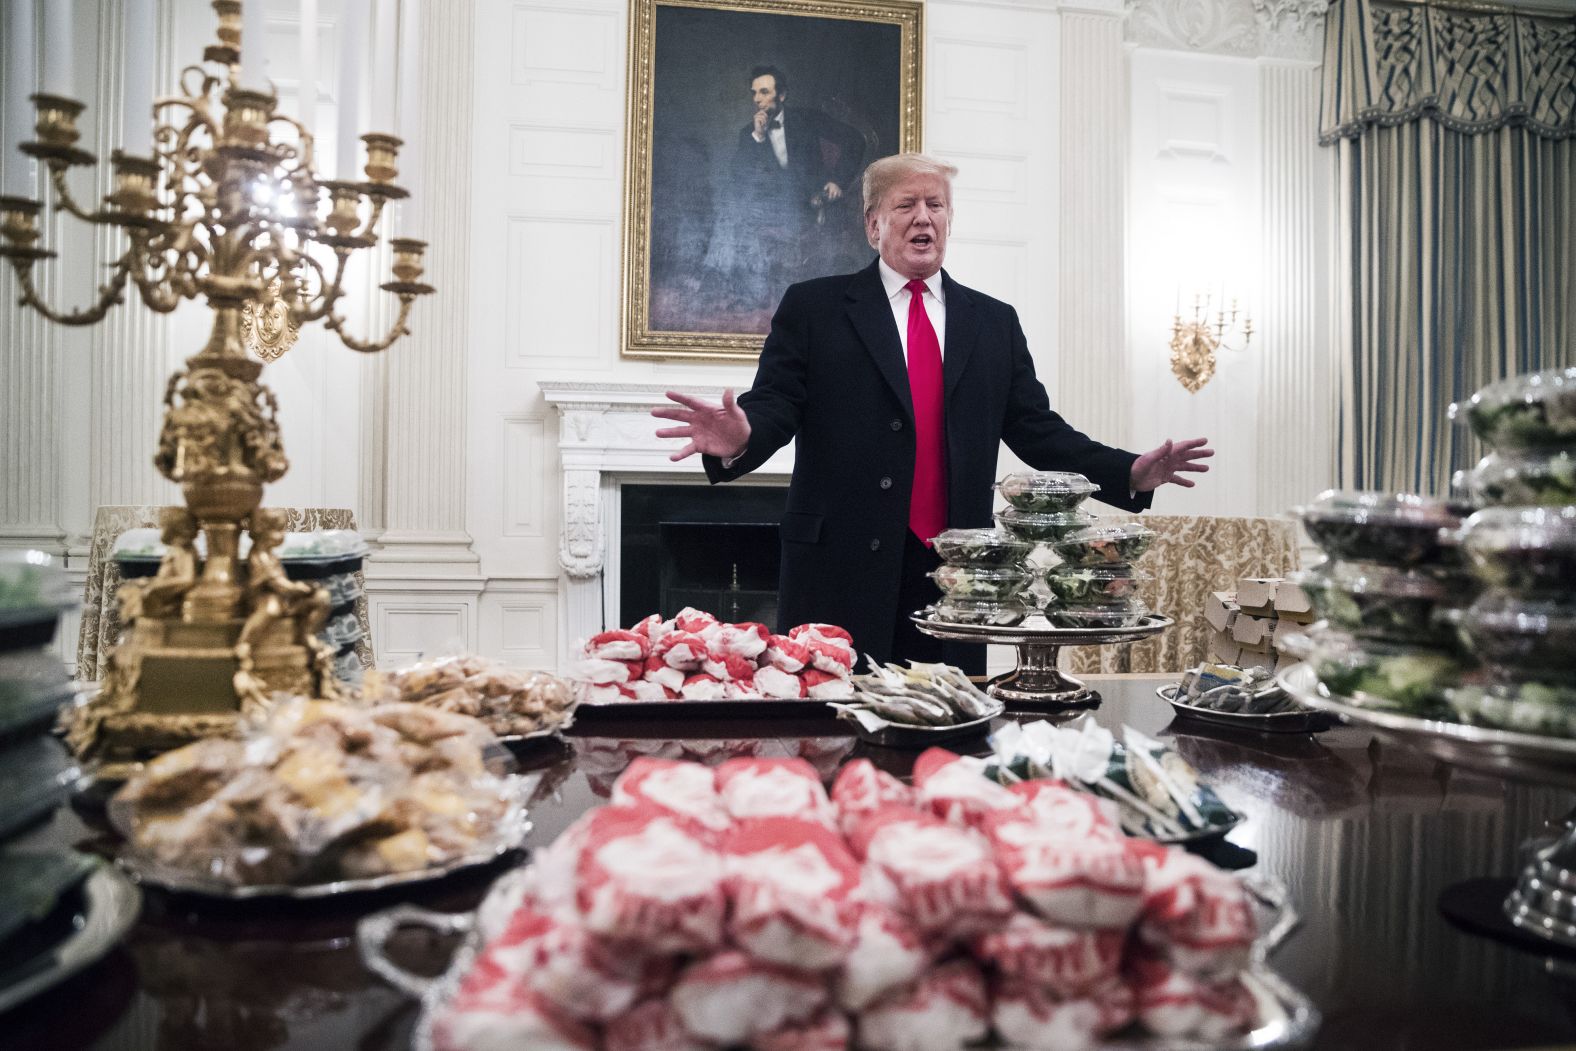 The President displays <a href="https://www.cnn.com/2019/01/14/politics/donald-trump-clemson-food/index.html" target="_blank">fast food he purchased</a> for the Clemson Tigers football team for their national championship celebration at the White House on January 14. "Because the Democrats refuse to negotiate on border security, much of the residence staff at the White House is furloughed -- so the President is personally paying for the event to be catered with some of everyone's favorite fast foods," deputy press secretary Hogan Gidley told CNN in a statement